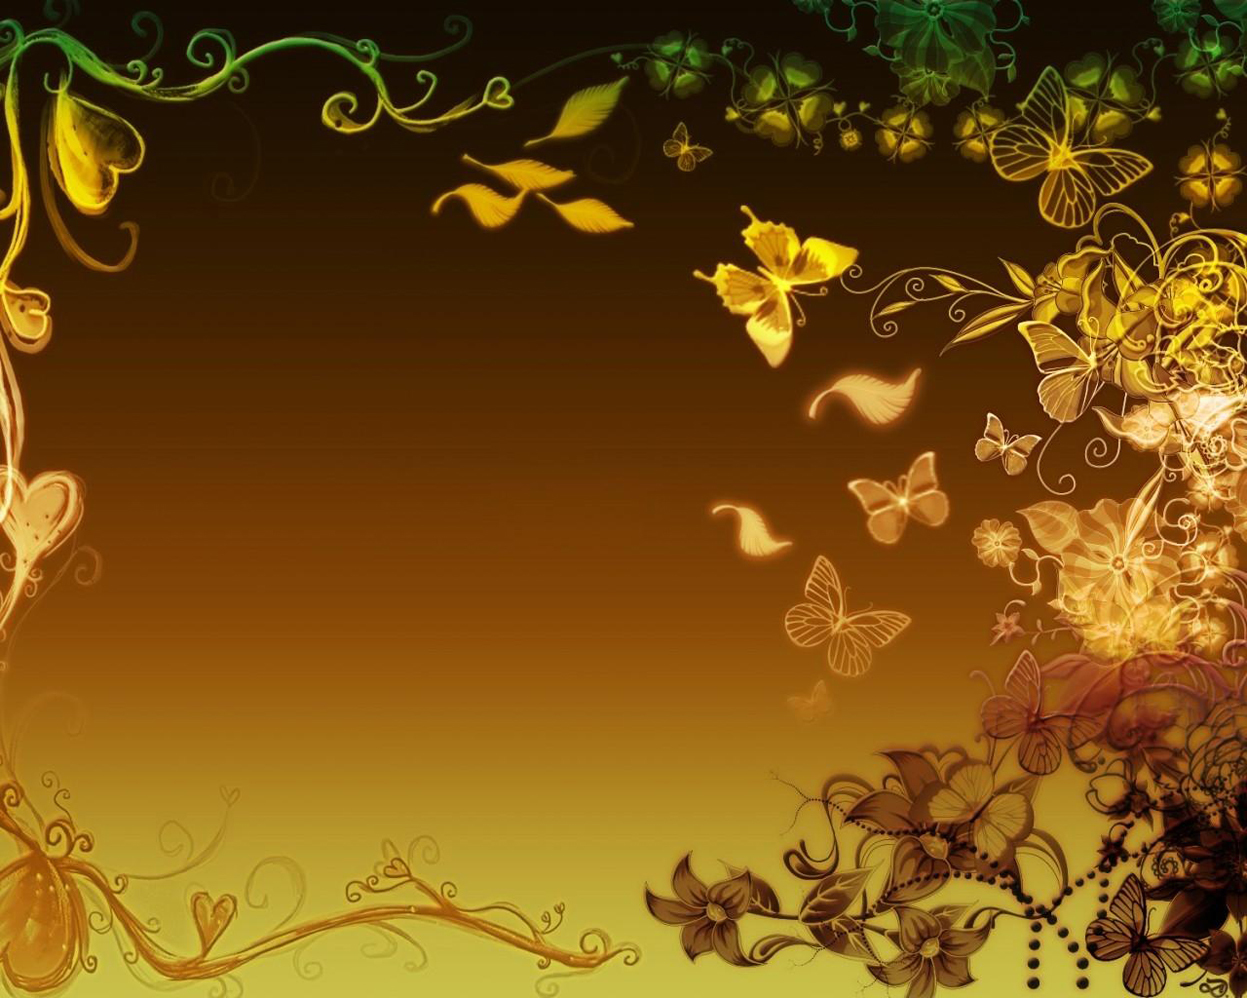 android patterns, butterflies, background, orange